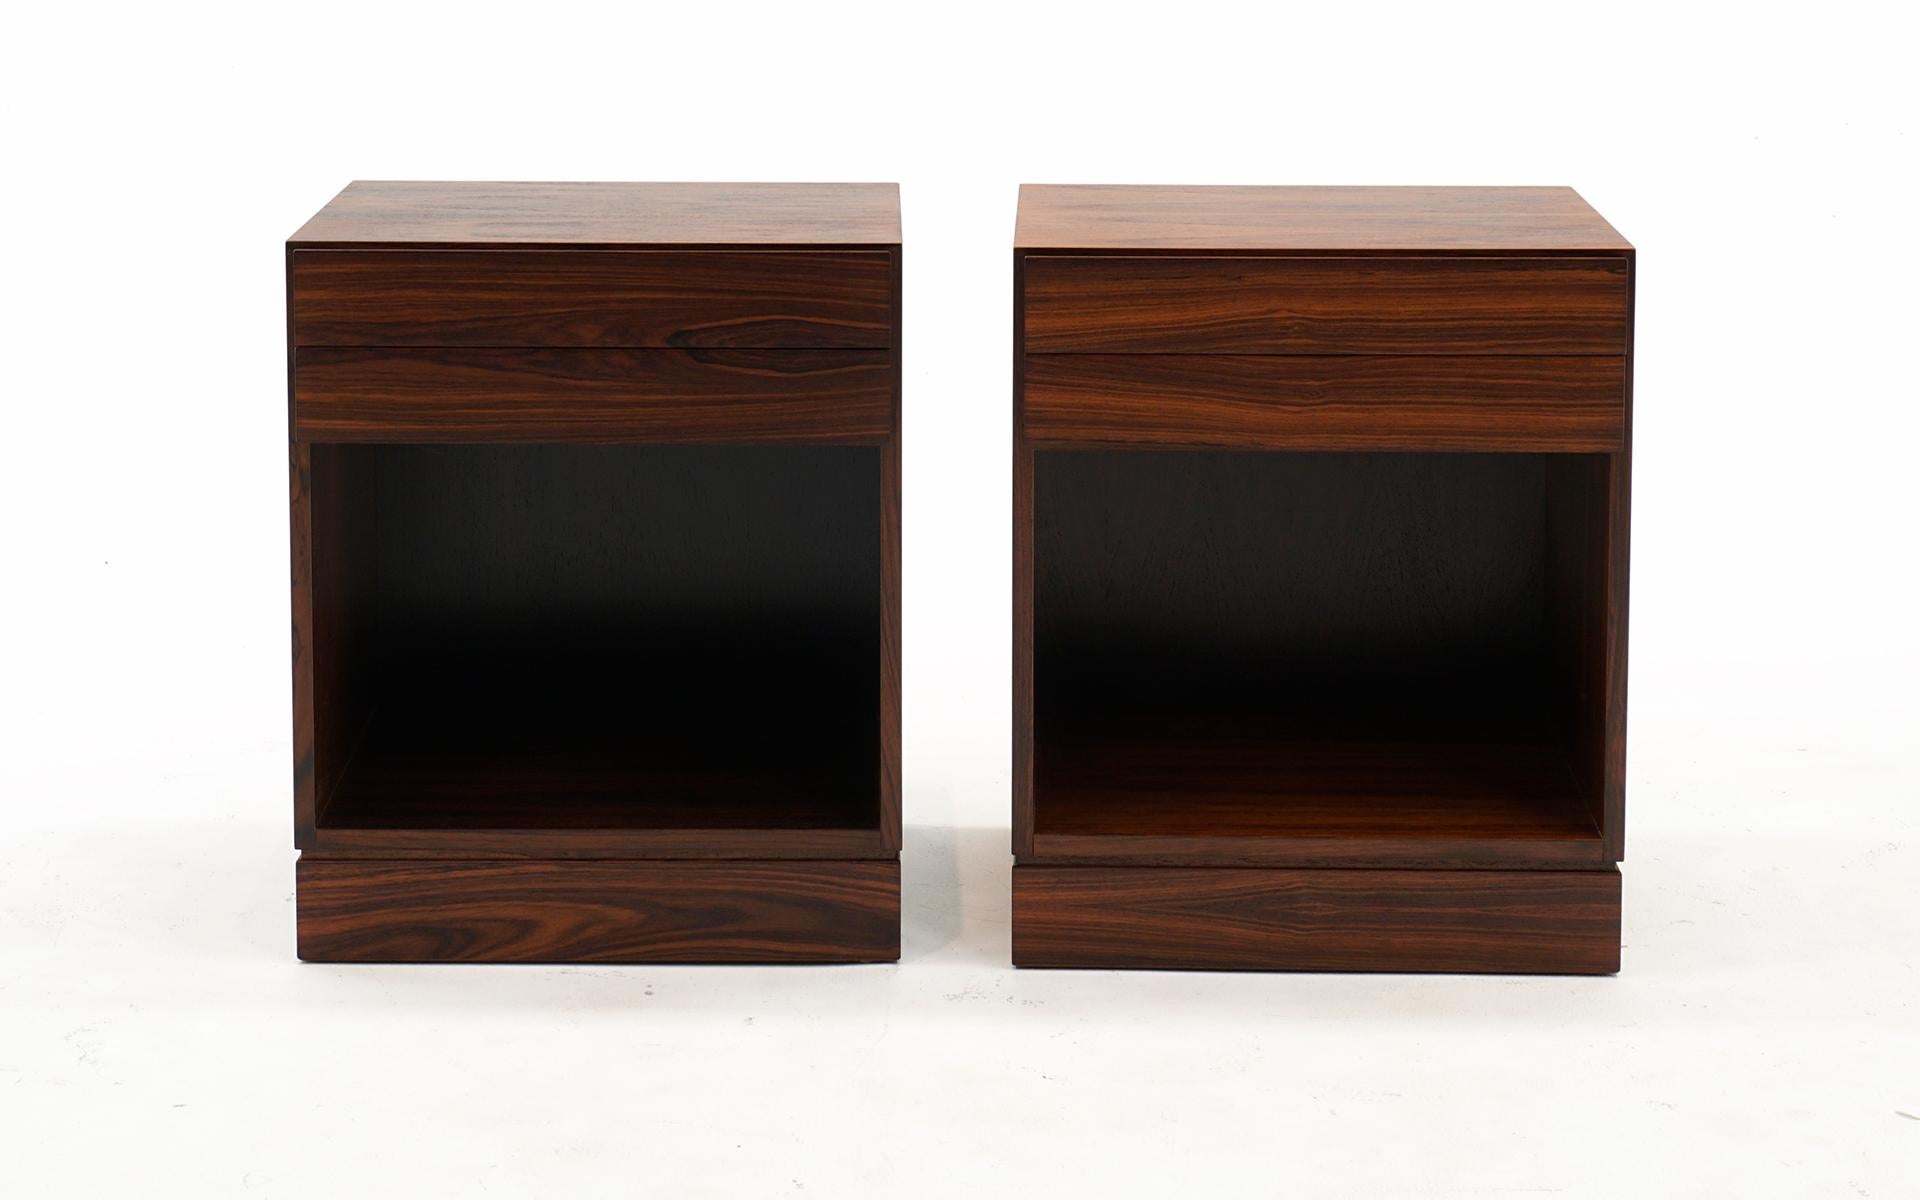 Pair of Danish Modern mid-century night stands / end / side tables in Brazilian rosewood designed by Arne Wahl Iversen, 1960s. Each with two drawers and open bottom storage. These have been expertly refinished and are in beautiful condition, ready